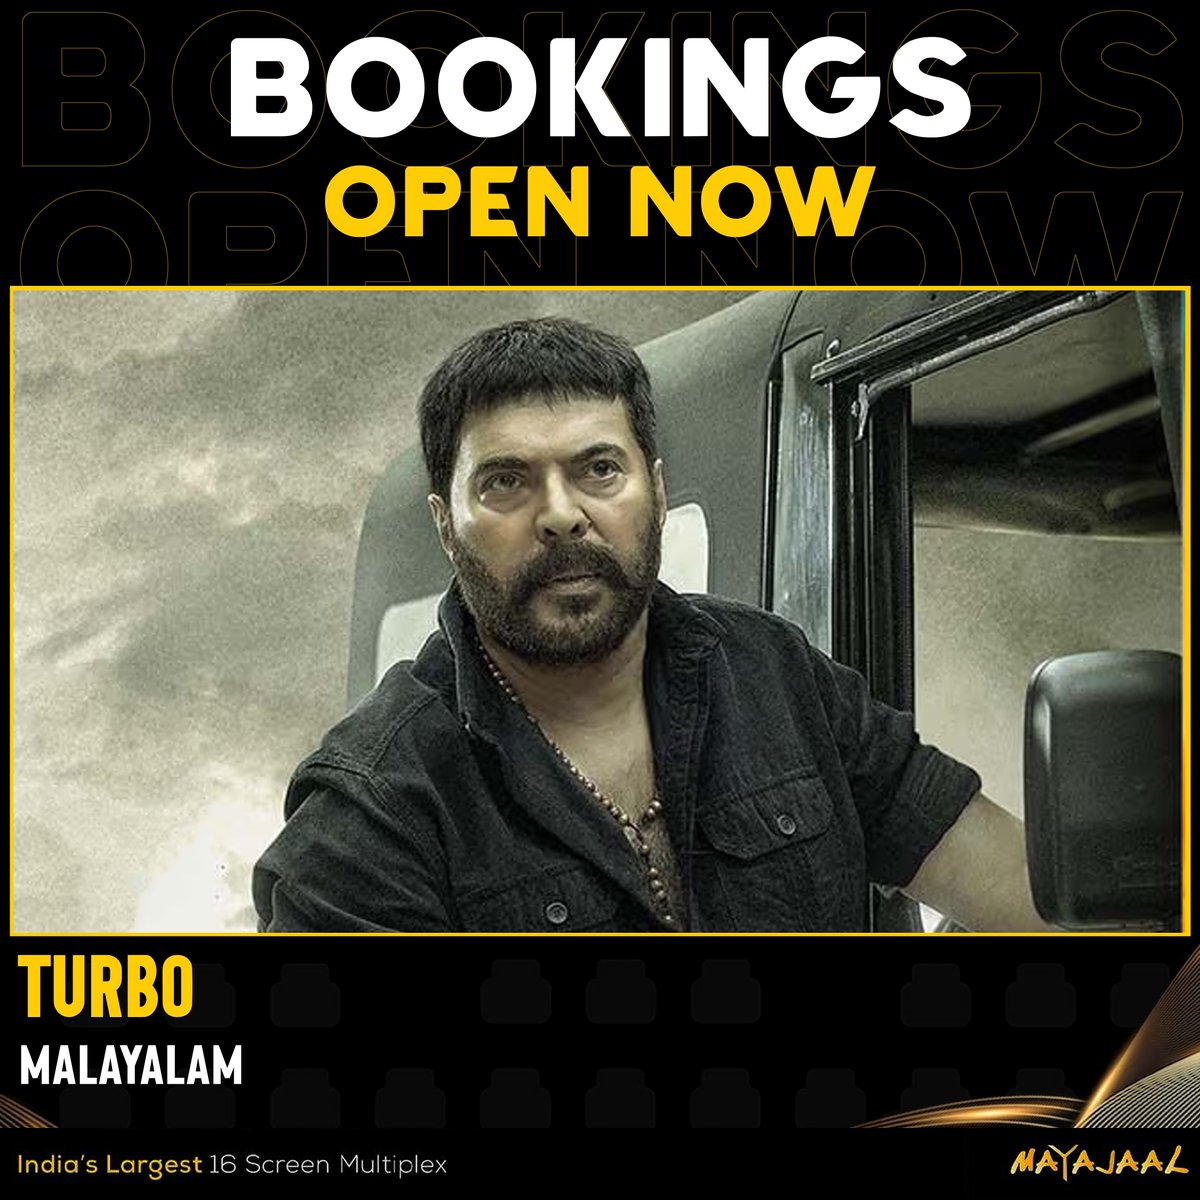 Get ready for Mammuka as Turbo Jose, bringing those killer vibes! 🔥 Bookings open for #Turbo (Malayalam) at #Mayajaal 🎟️bit.ly/3sVdbqD #TurboFromMay23 #Mammootty